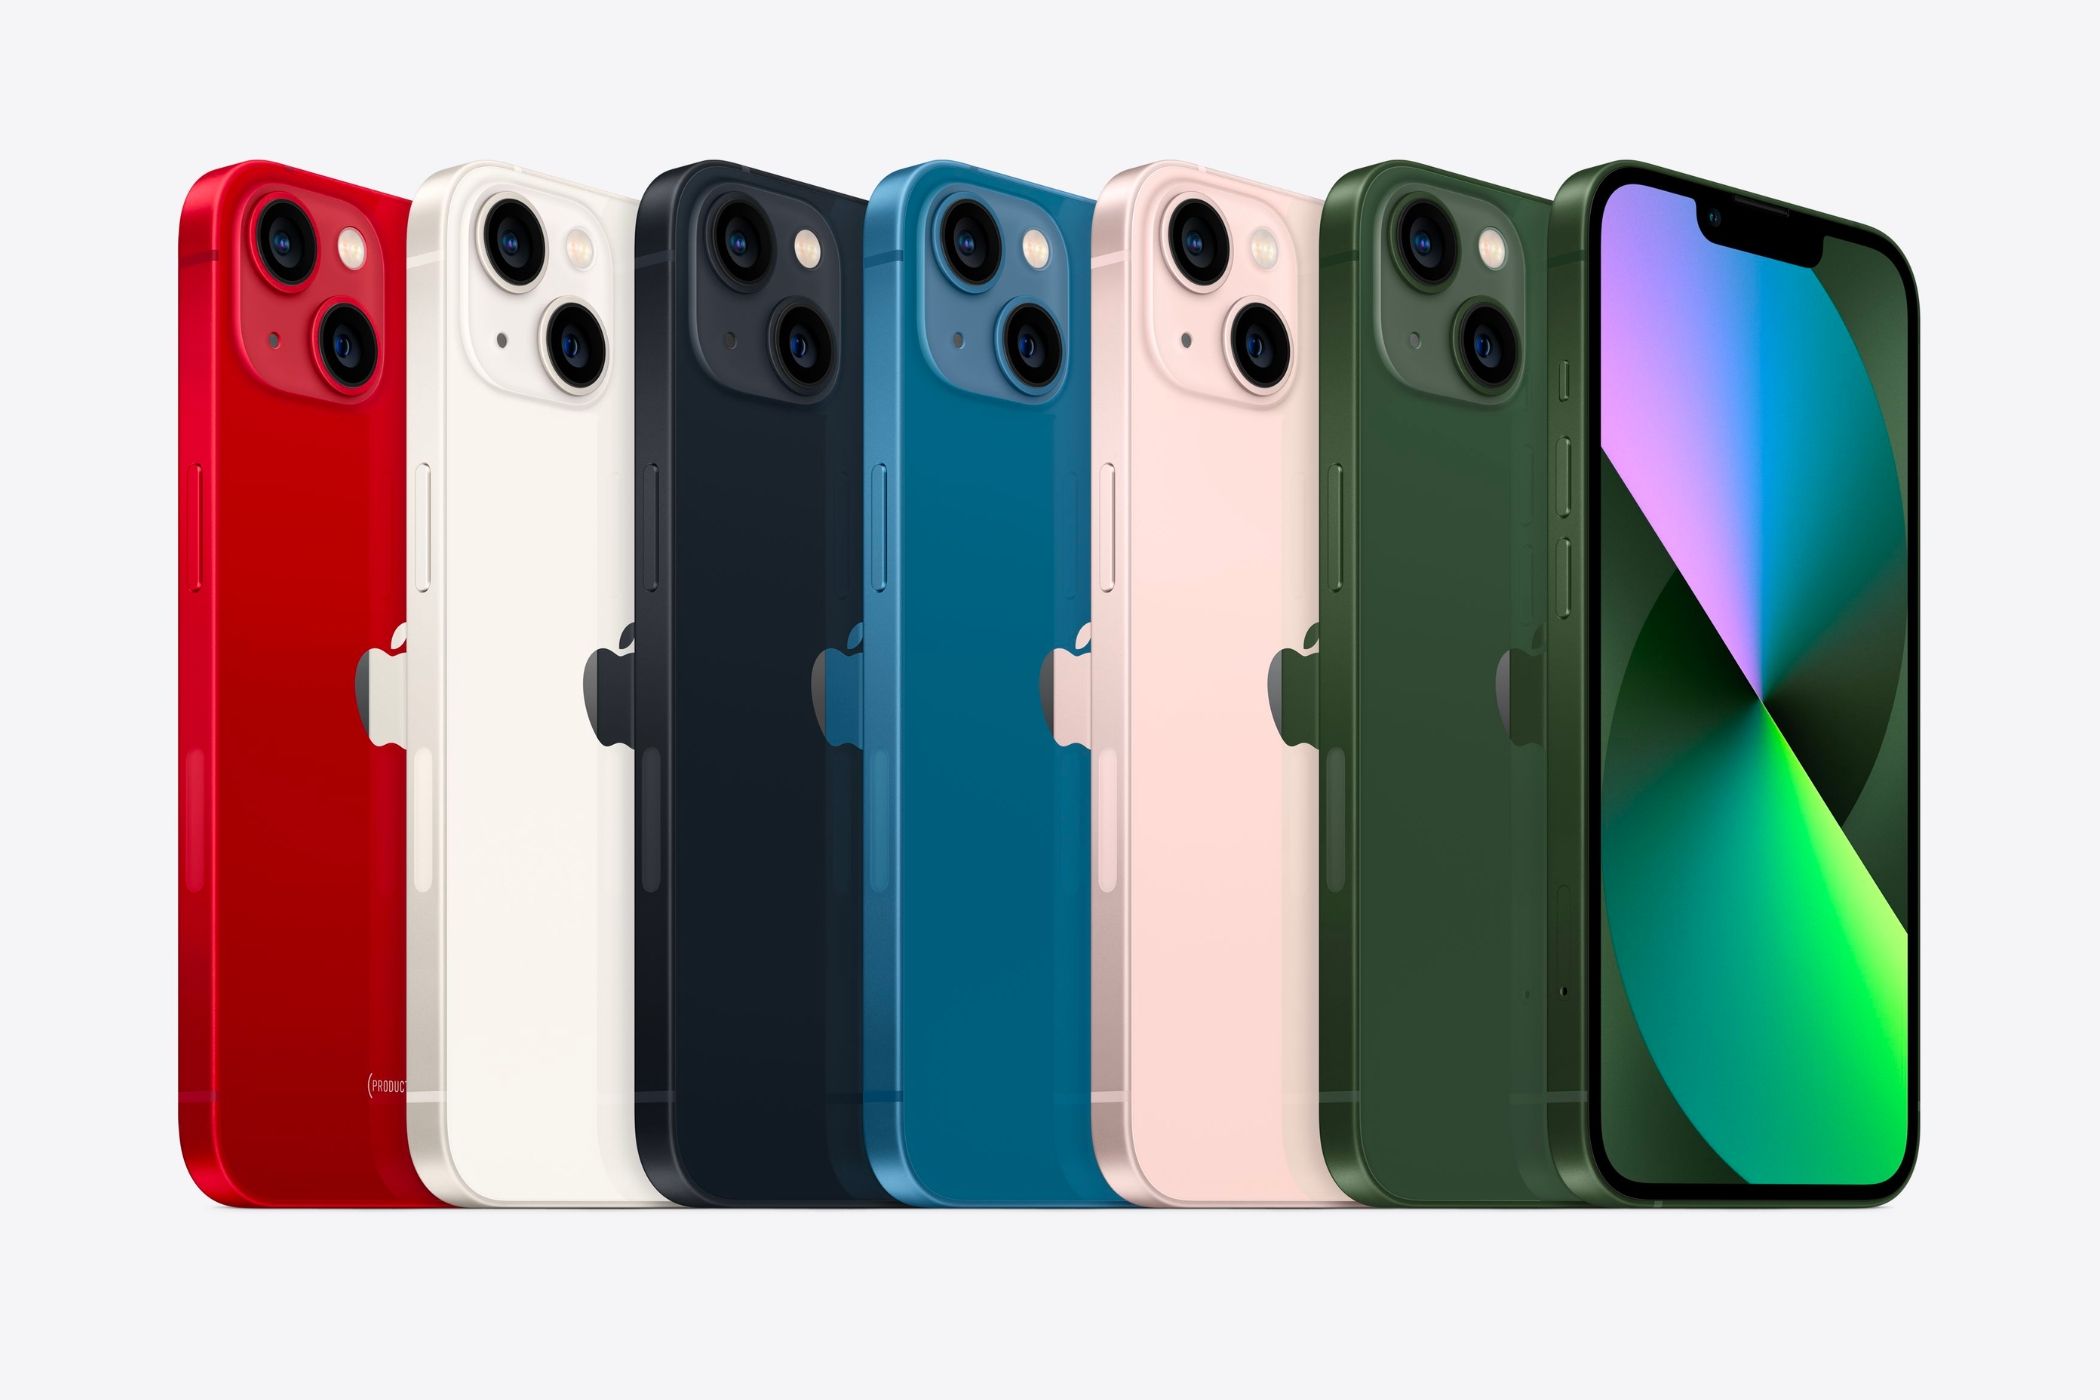 iPhone 13 in six different colors.